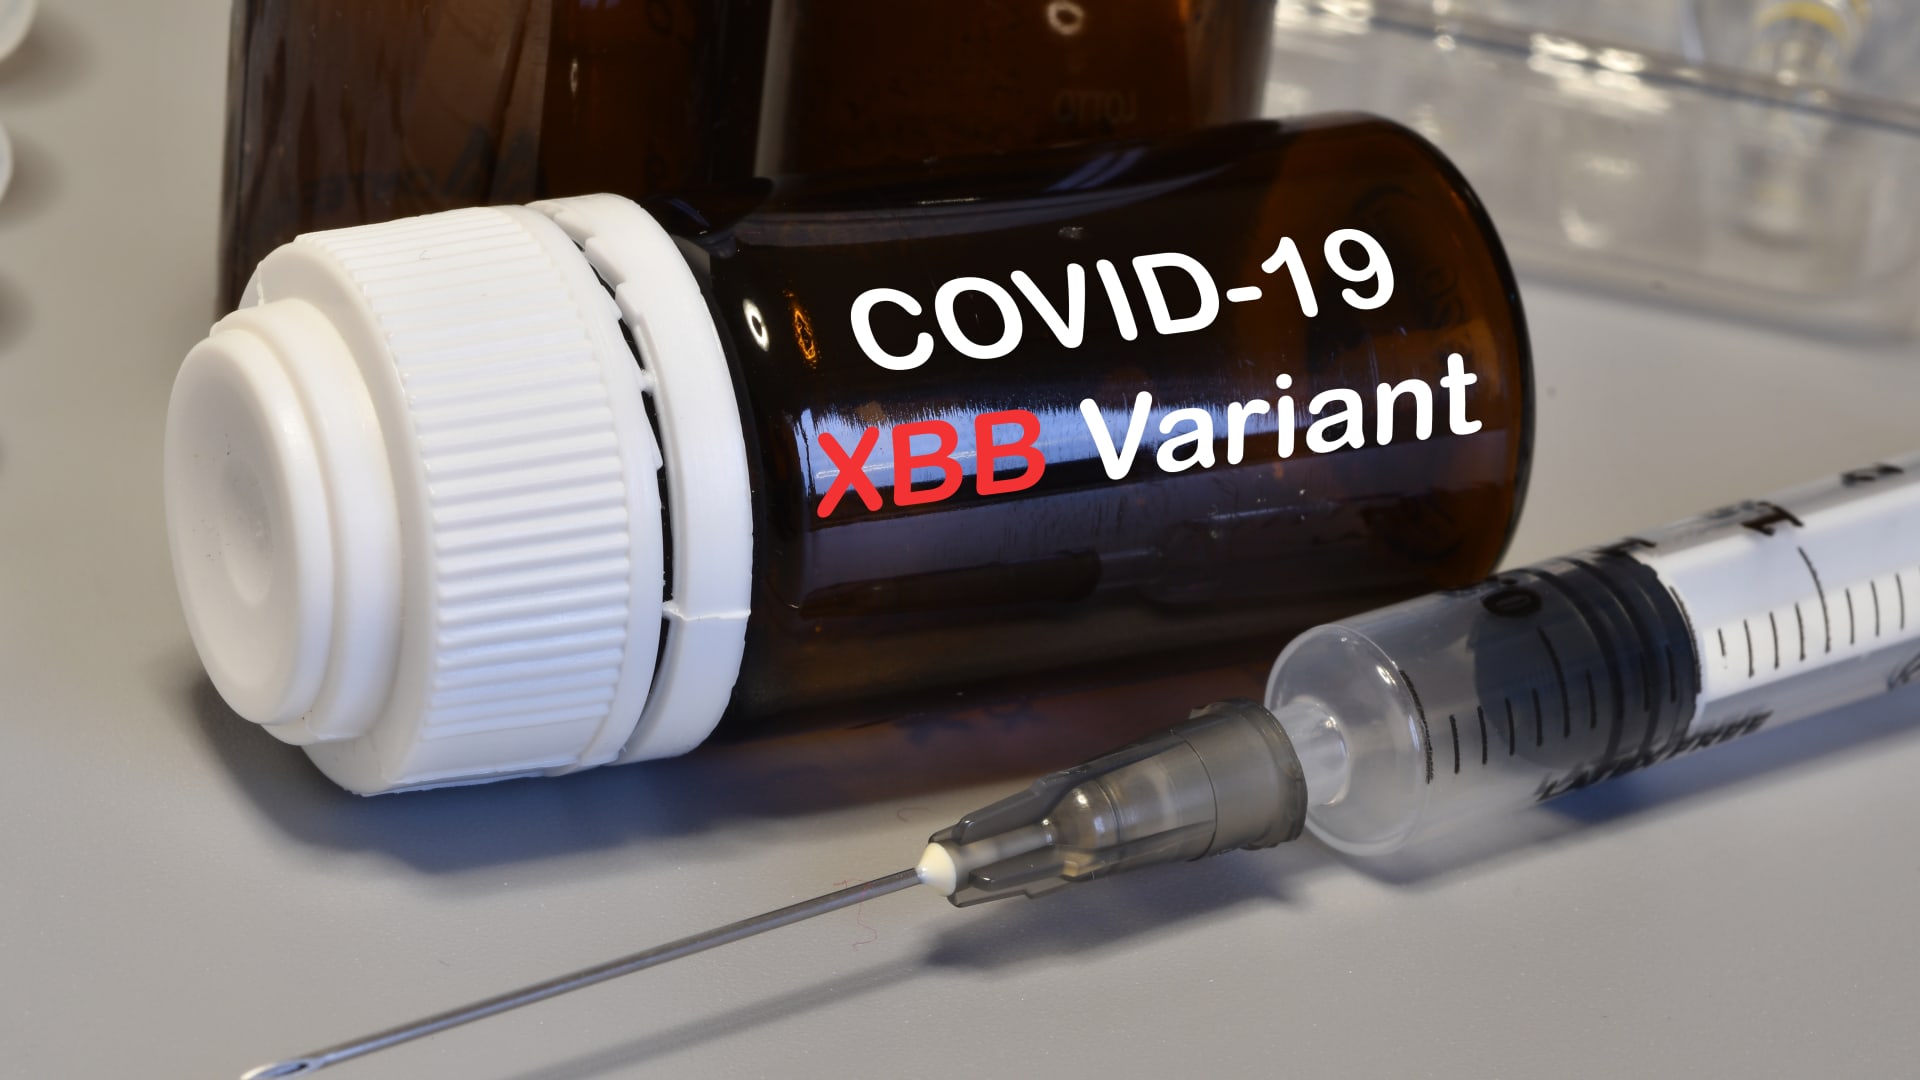 New Covid vaccines in fall need to target XBB variants, FDA staff says